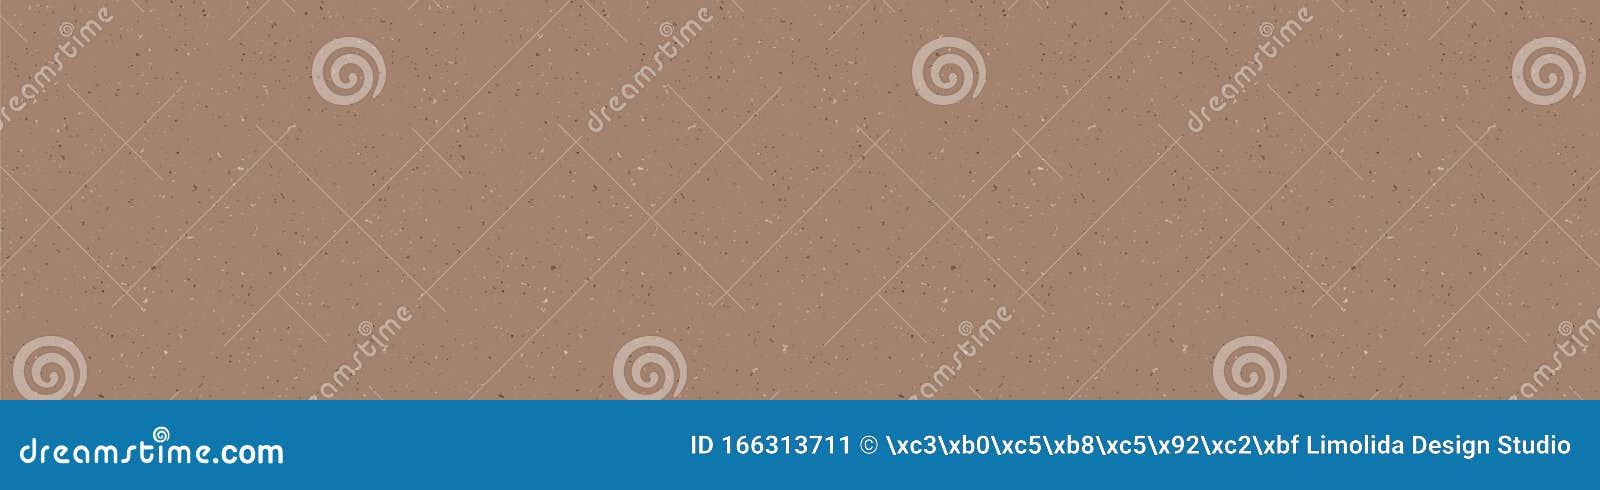 washi paper texture border background. brown natural mulberry rice flecks on organic kraft color. washi tape trim speckled